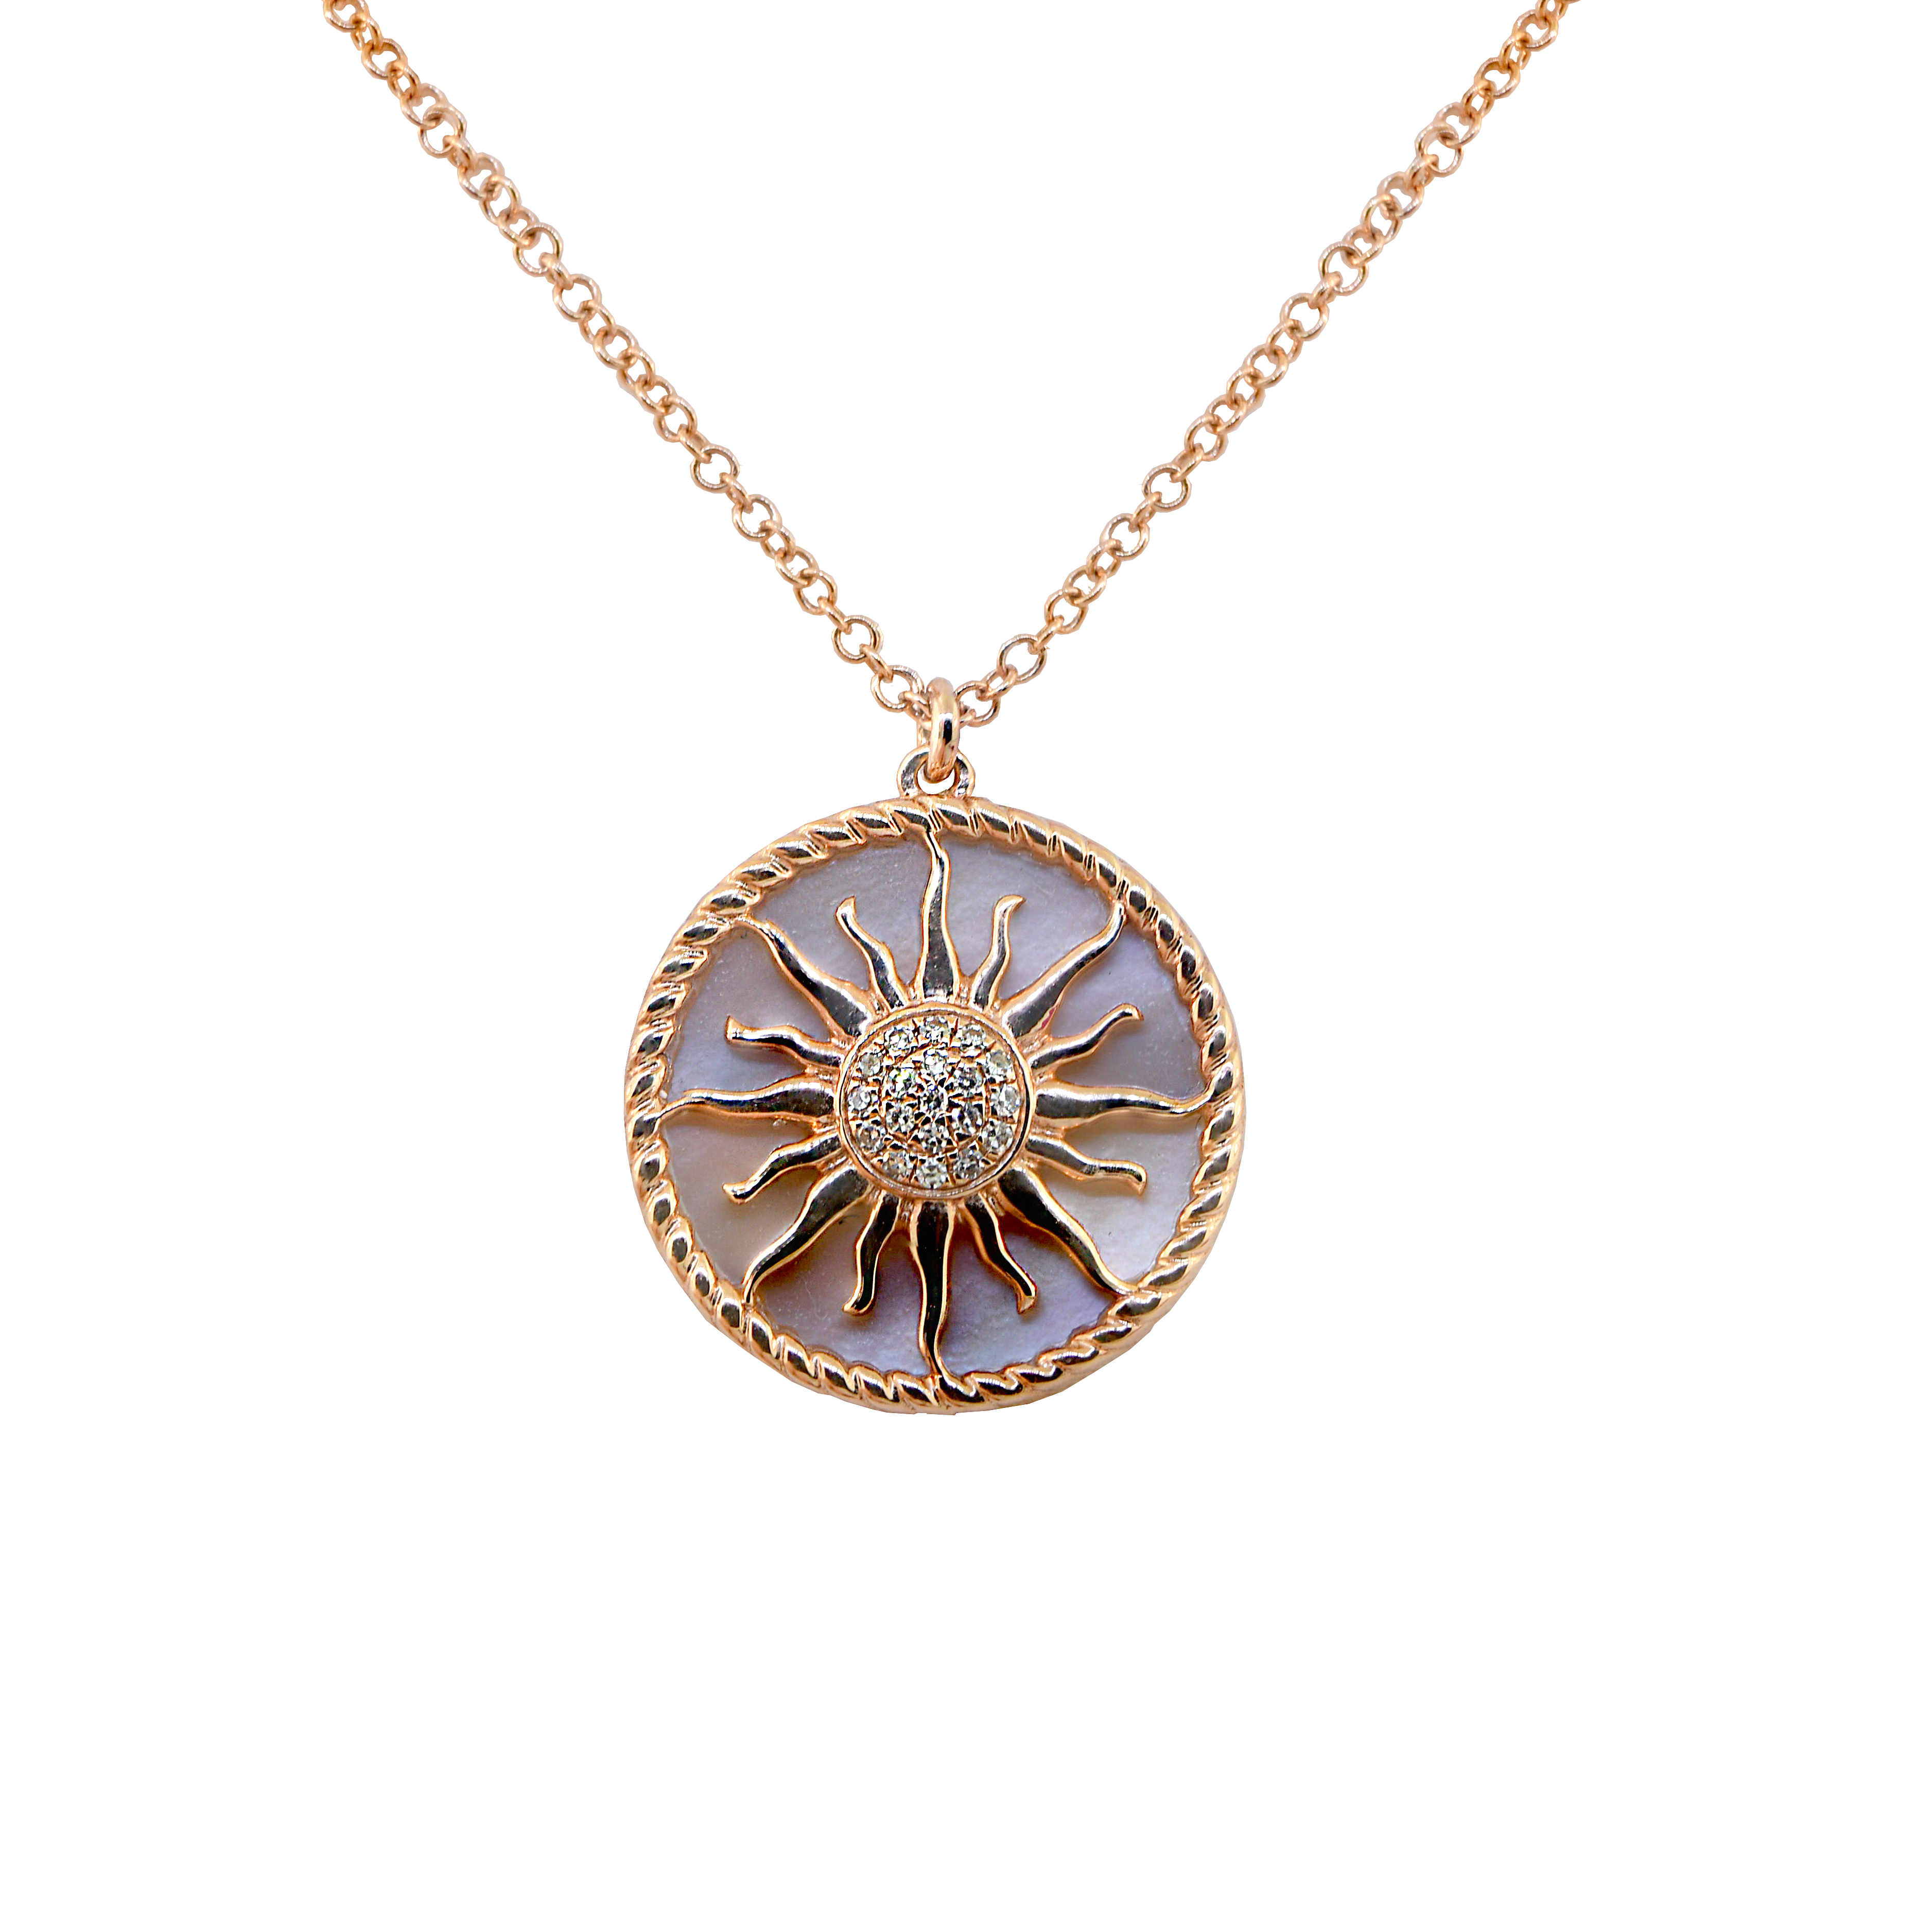 Sun pendant and necklace with 925 Sterling silver and Opal Stone